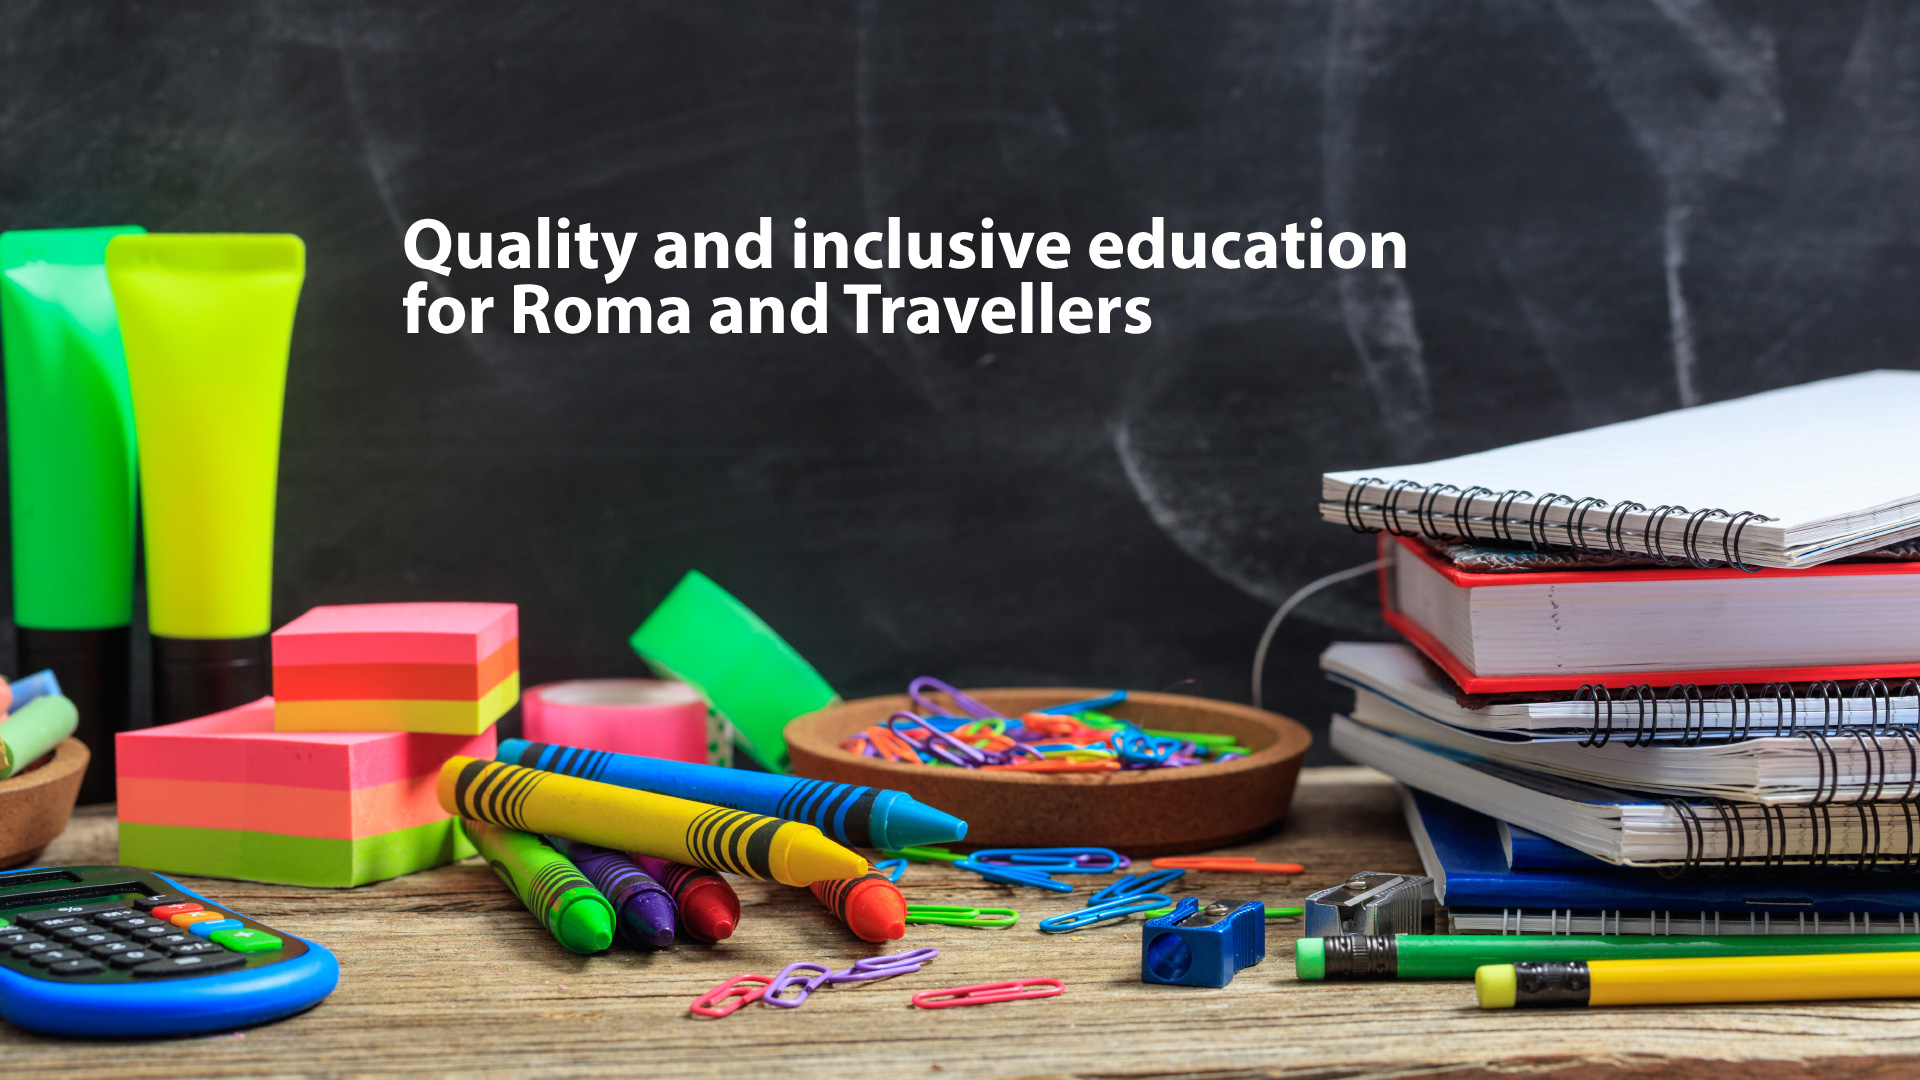 Q&A - Call for consultancy services for developing a position paper on quality and inclusive education for Roma and Travellers